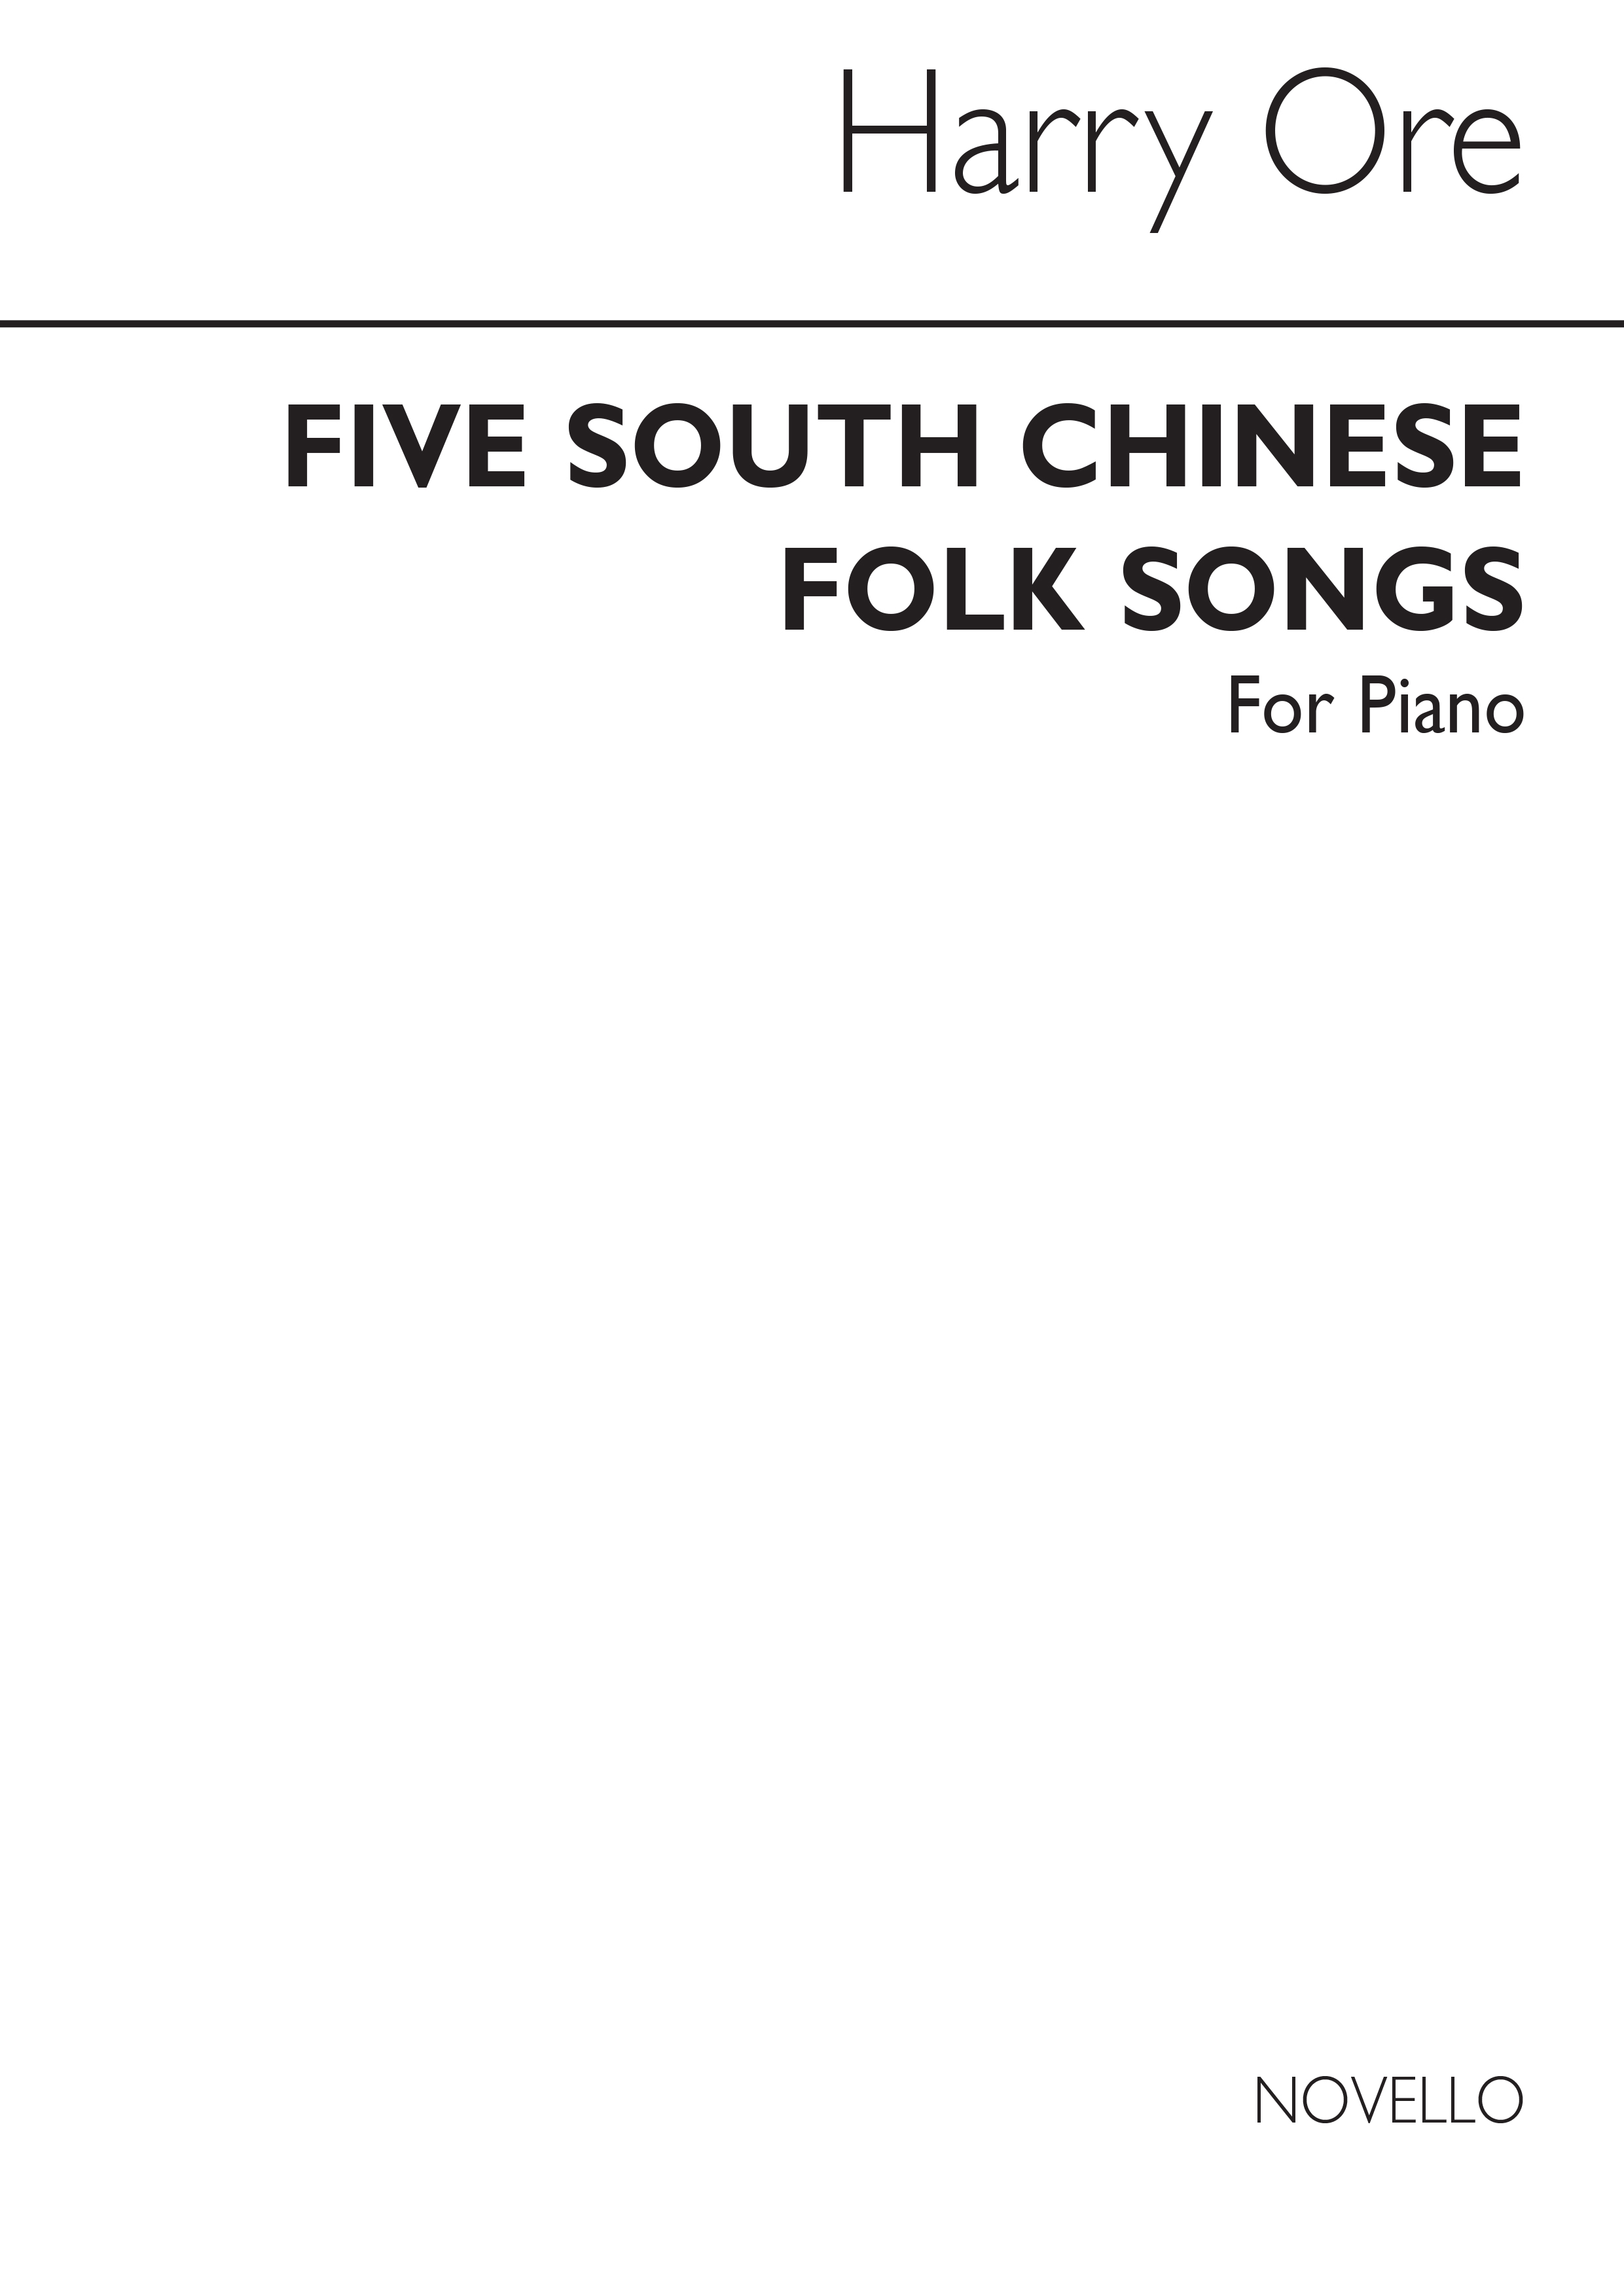 Harry Ore: Five South Chinese Folk Songs